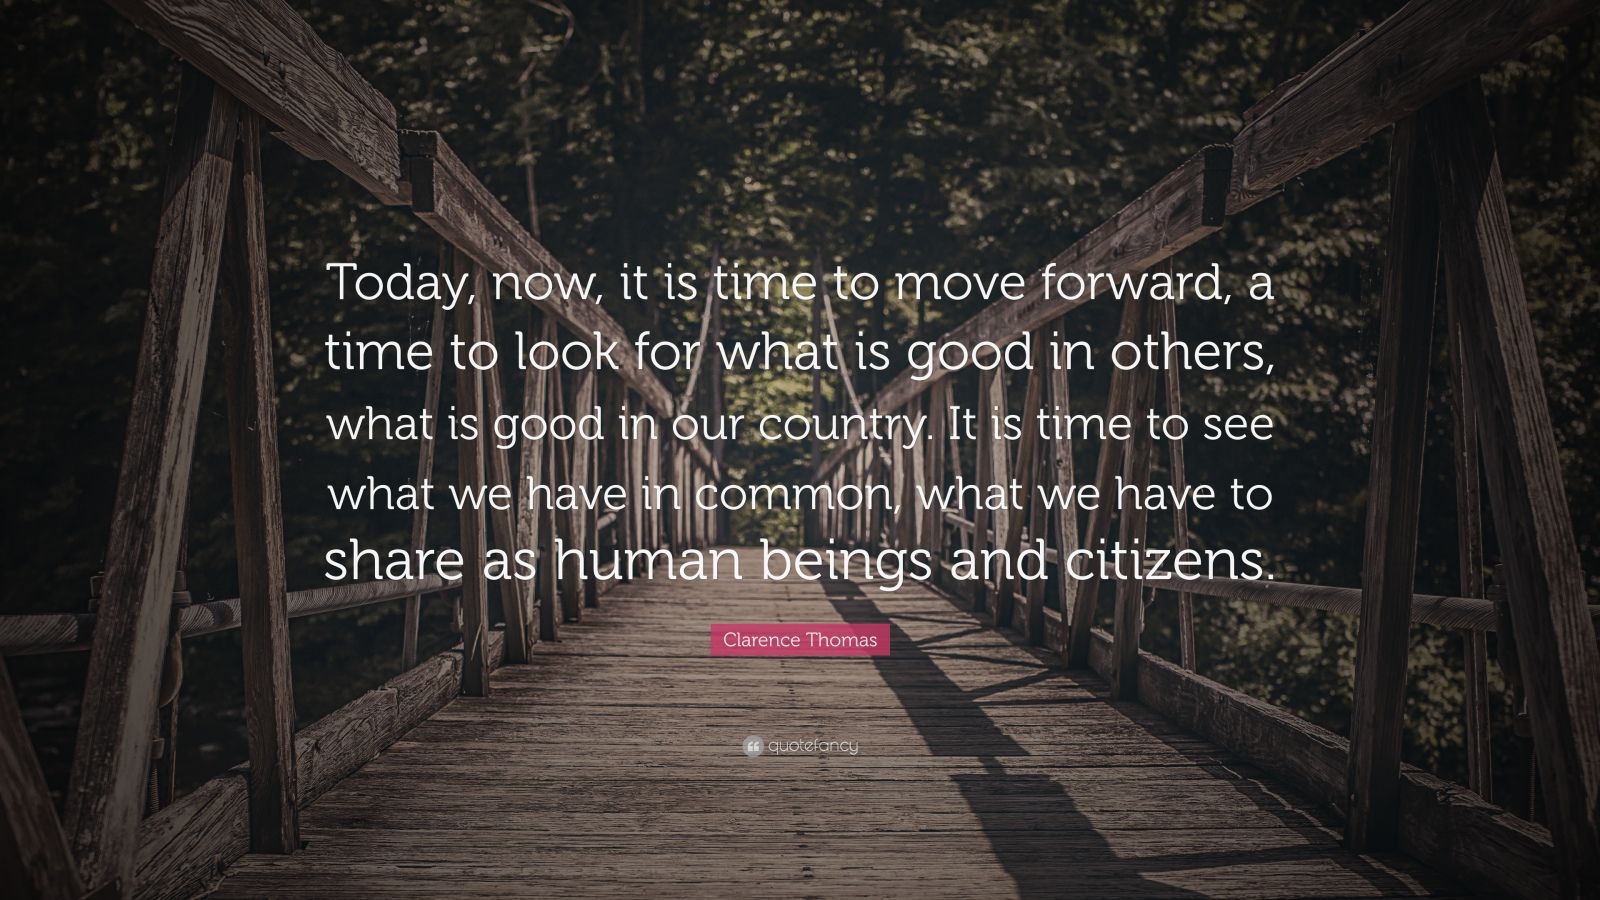 Clarence Thomas Quote: “Today, now, it is time to move forward, a time ...